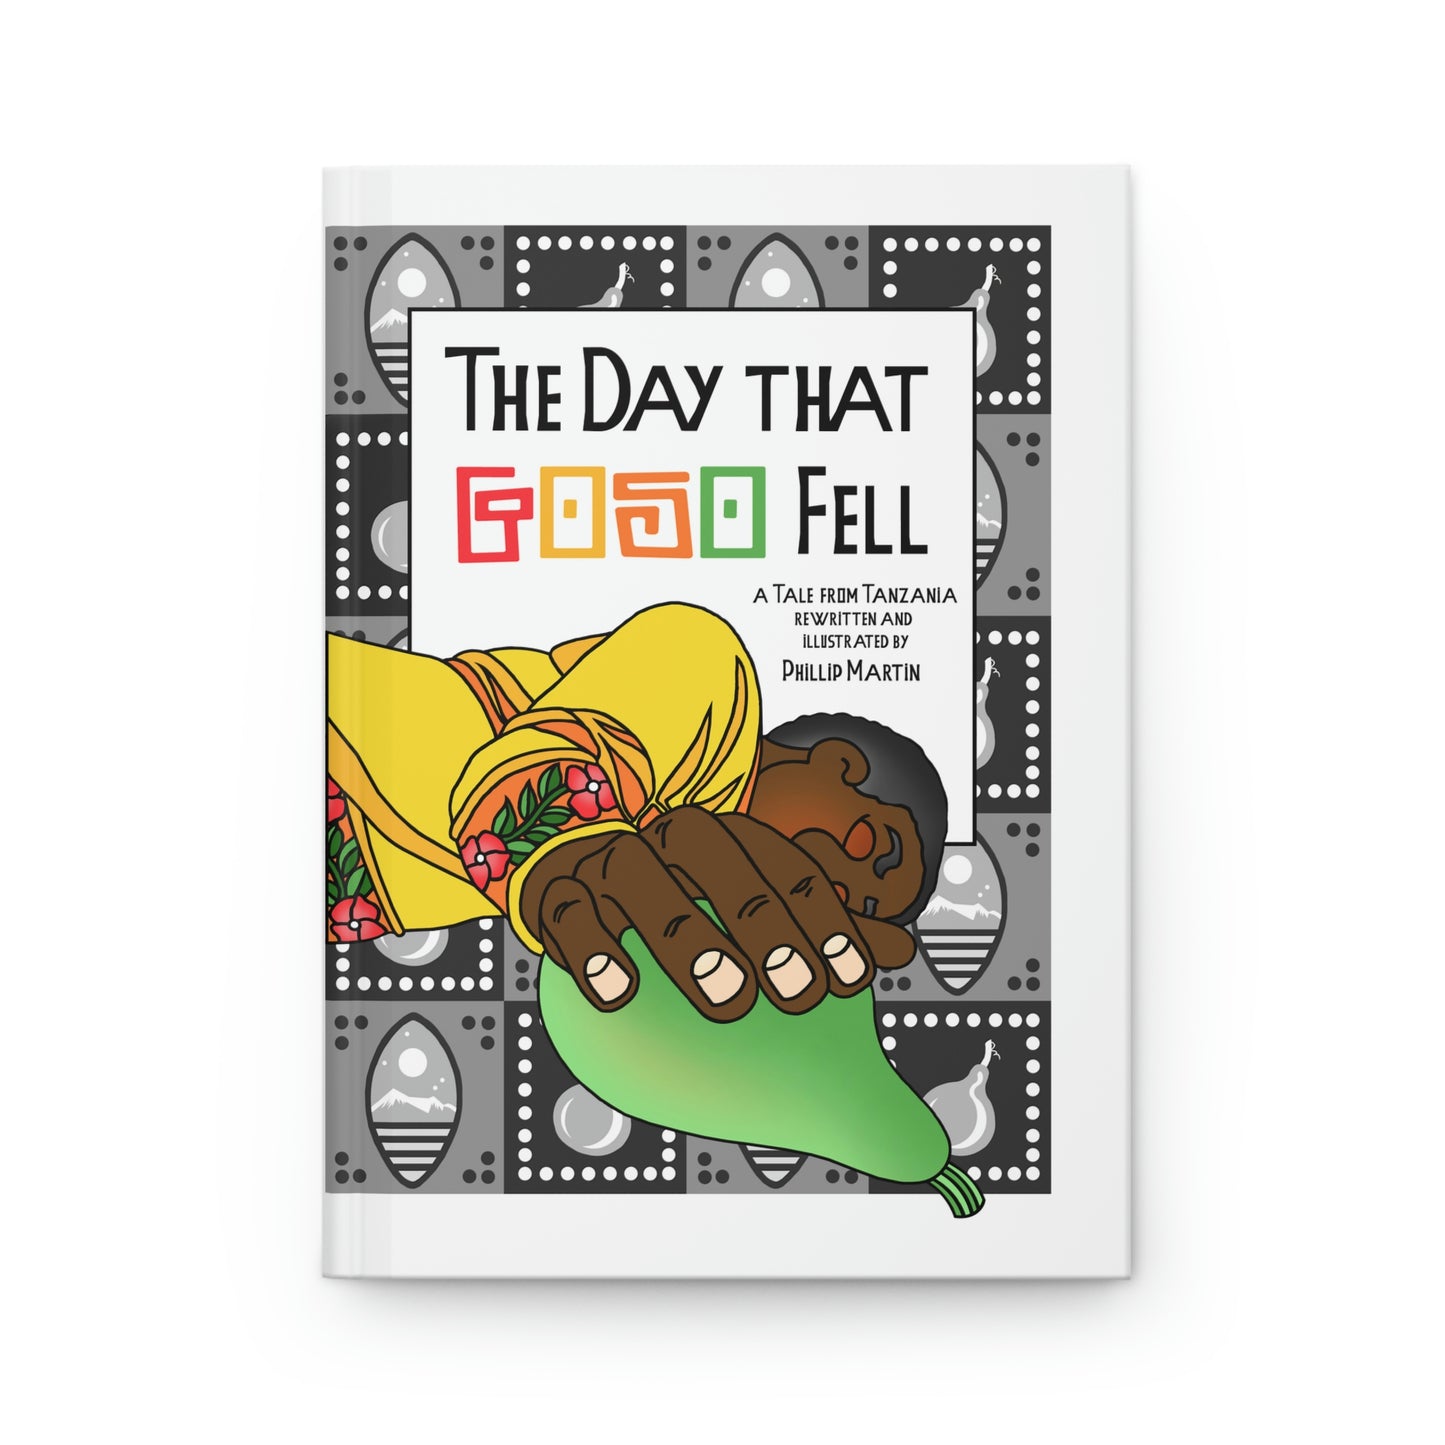 The Day the Goso Fell Hardcover Journal Matte